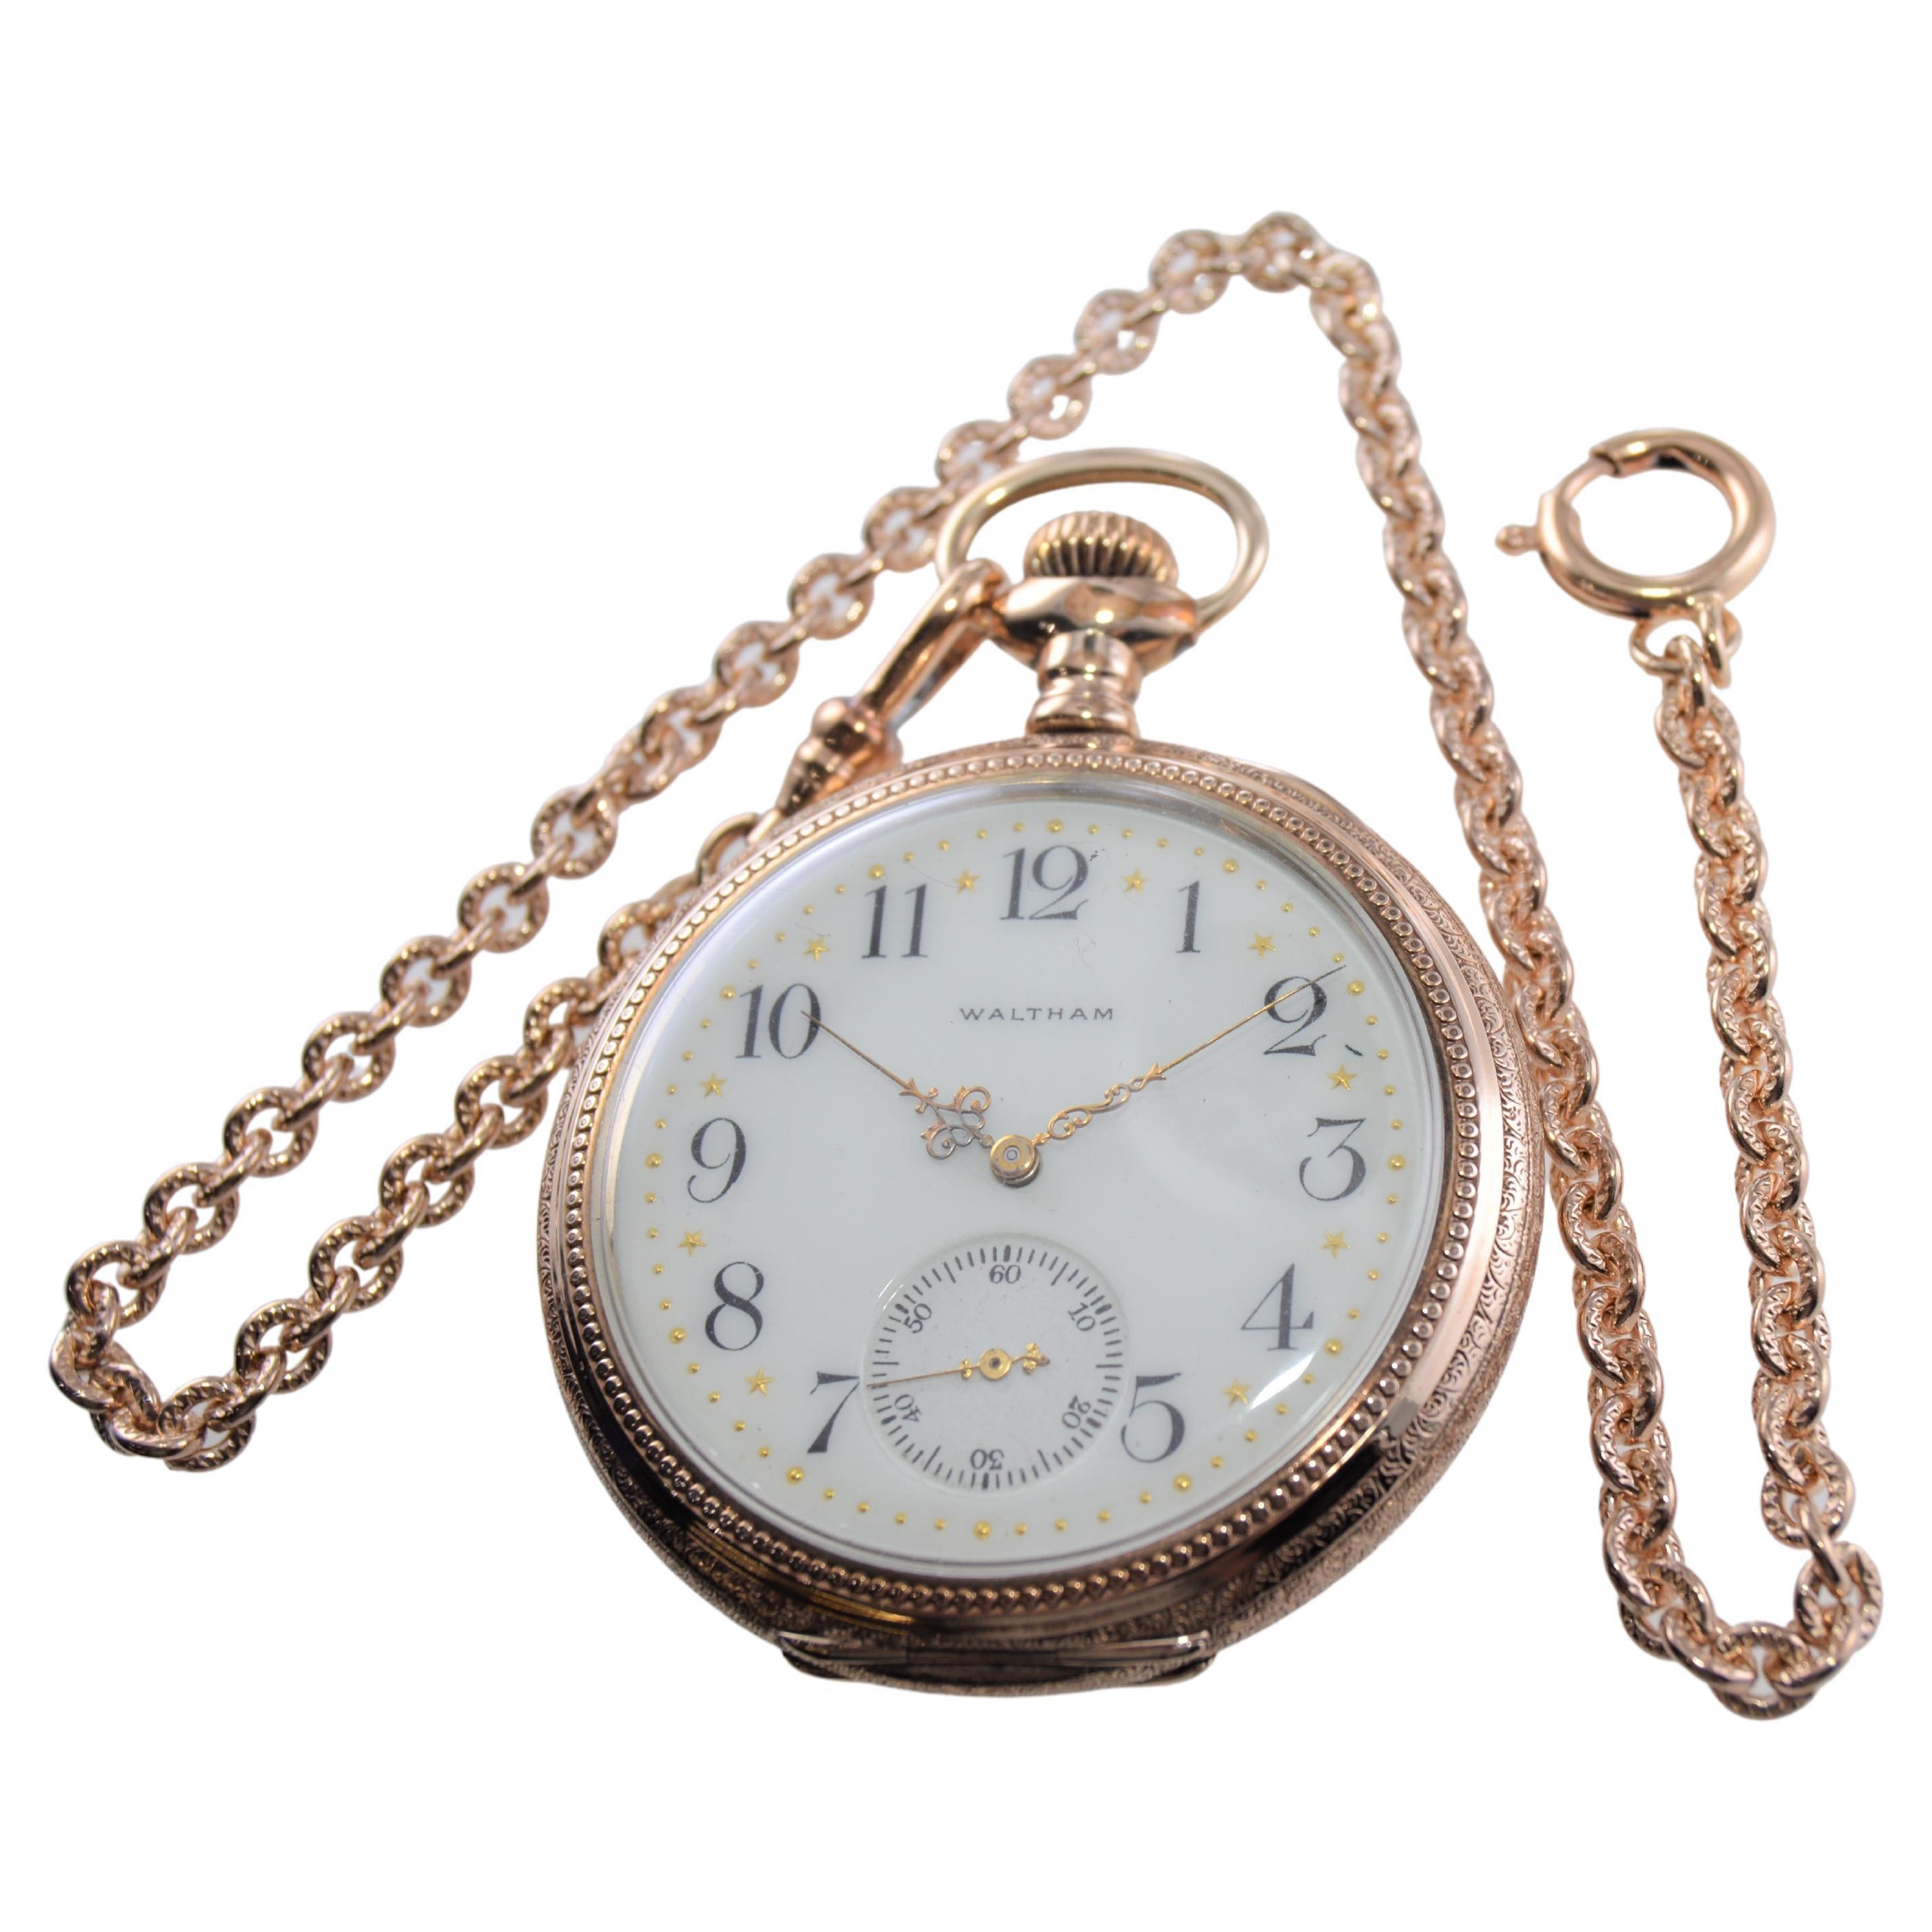 Waltham Yellow Gold Filled Open Faced Pocket Watch with Enamel Dial from 1897 For Sale